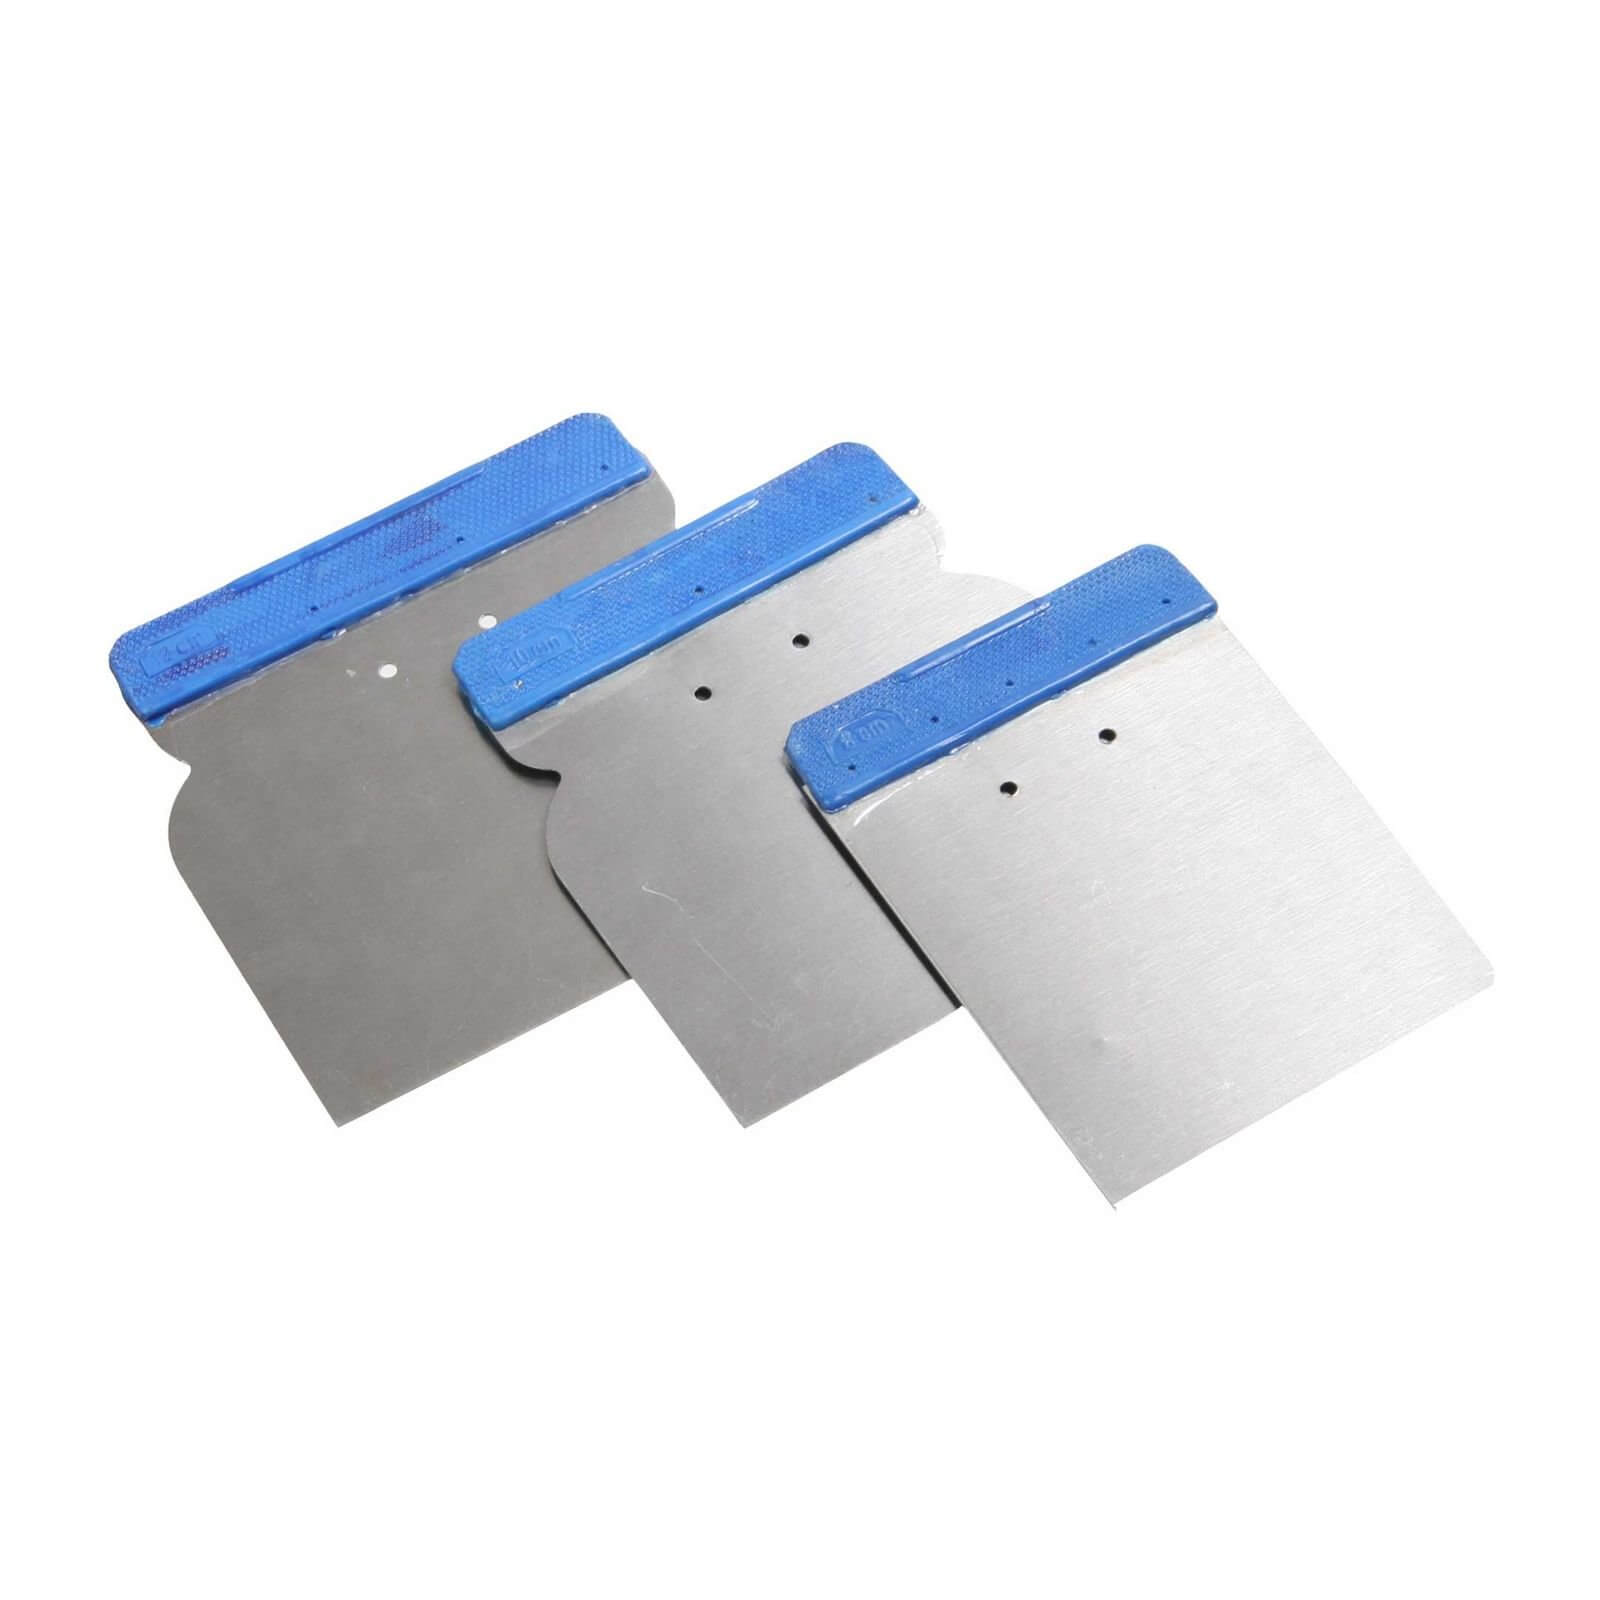 Harris Trademate Continental Filling Knives 4 Pack